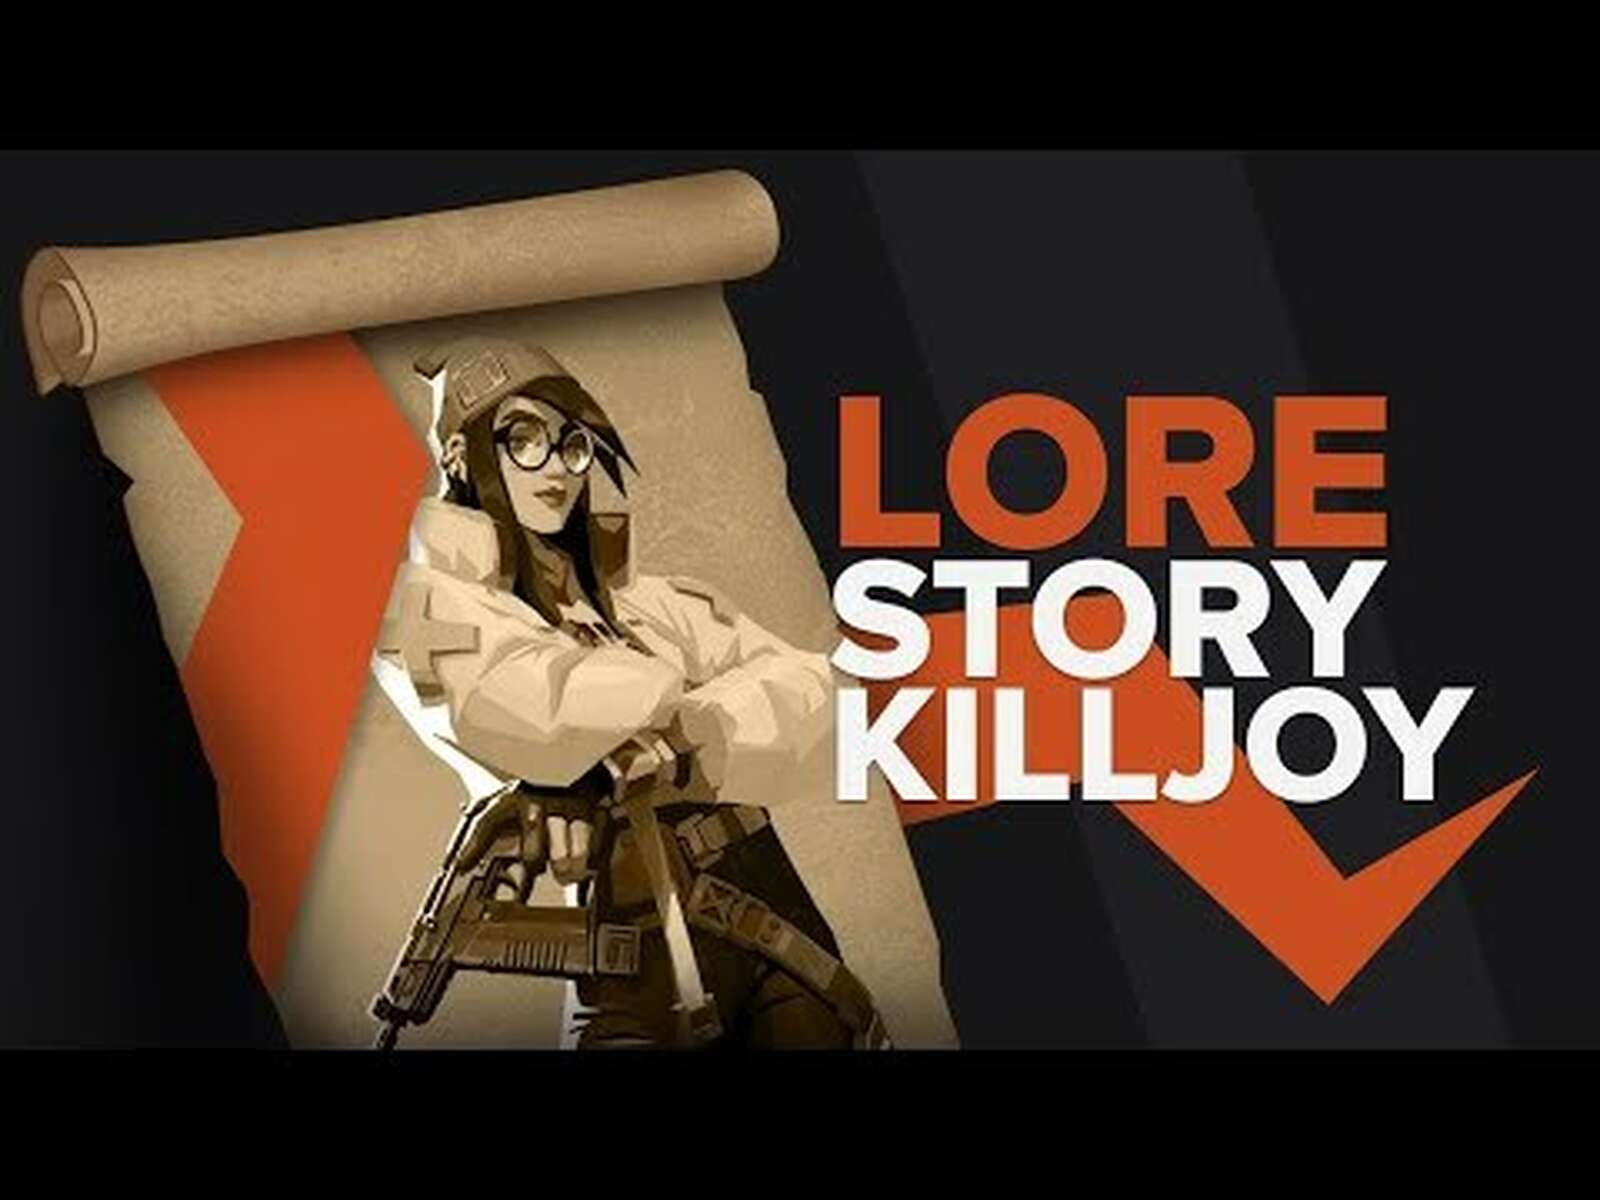 Killjoy. The Ultimate Inventor! KJ&#39;s Lore Story Explained | What we KNOW so far